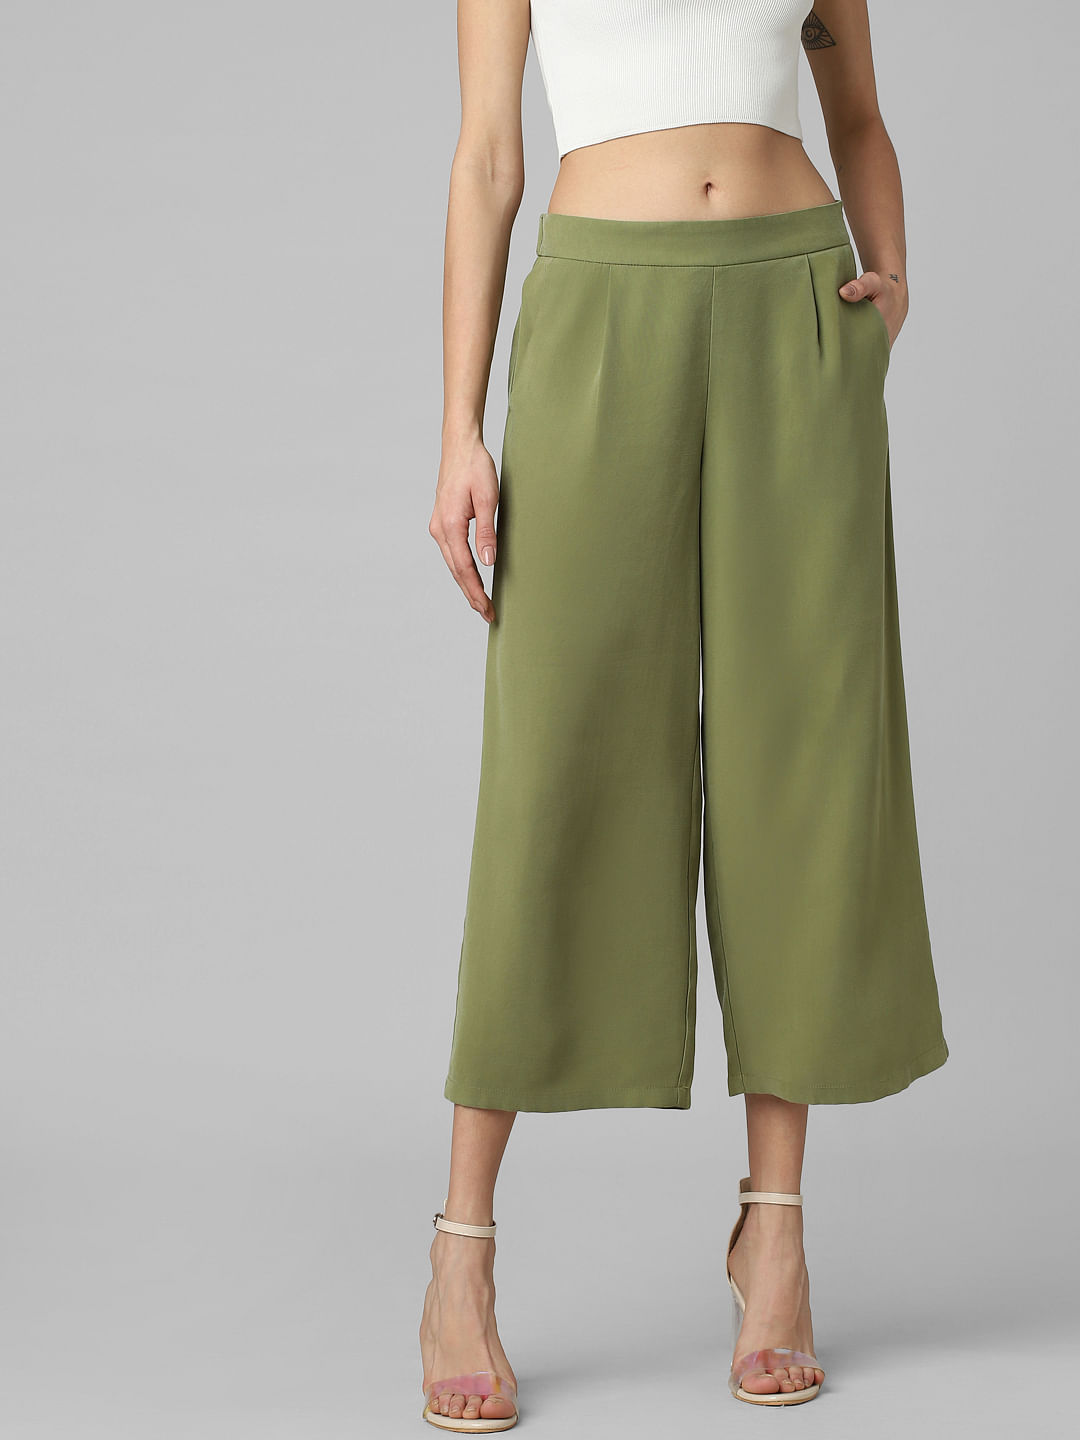 FableStreet Bottoms Pants and Trousers  Buy FableStreet High Waist Wide  Leg Trousers  Bottle Green Online  Nykaa Fashion